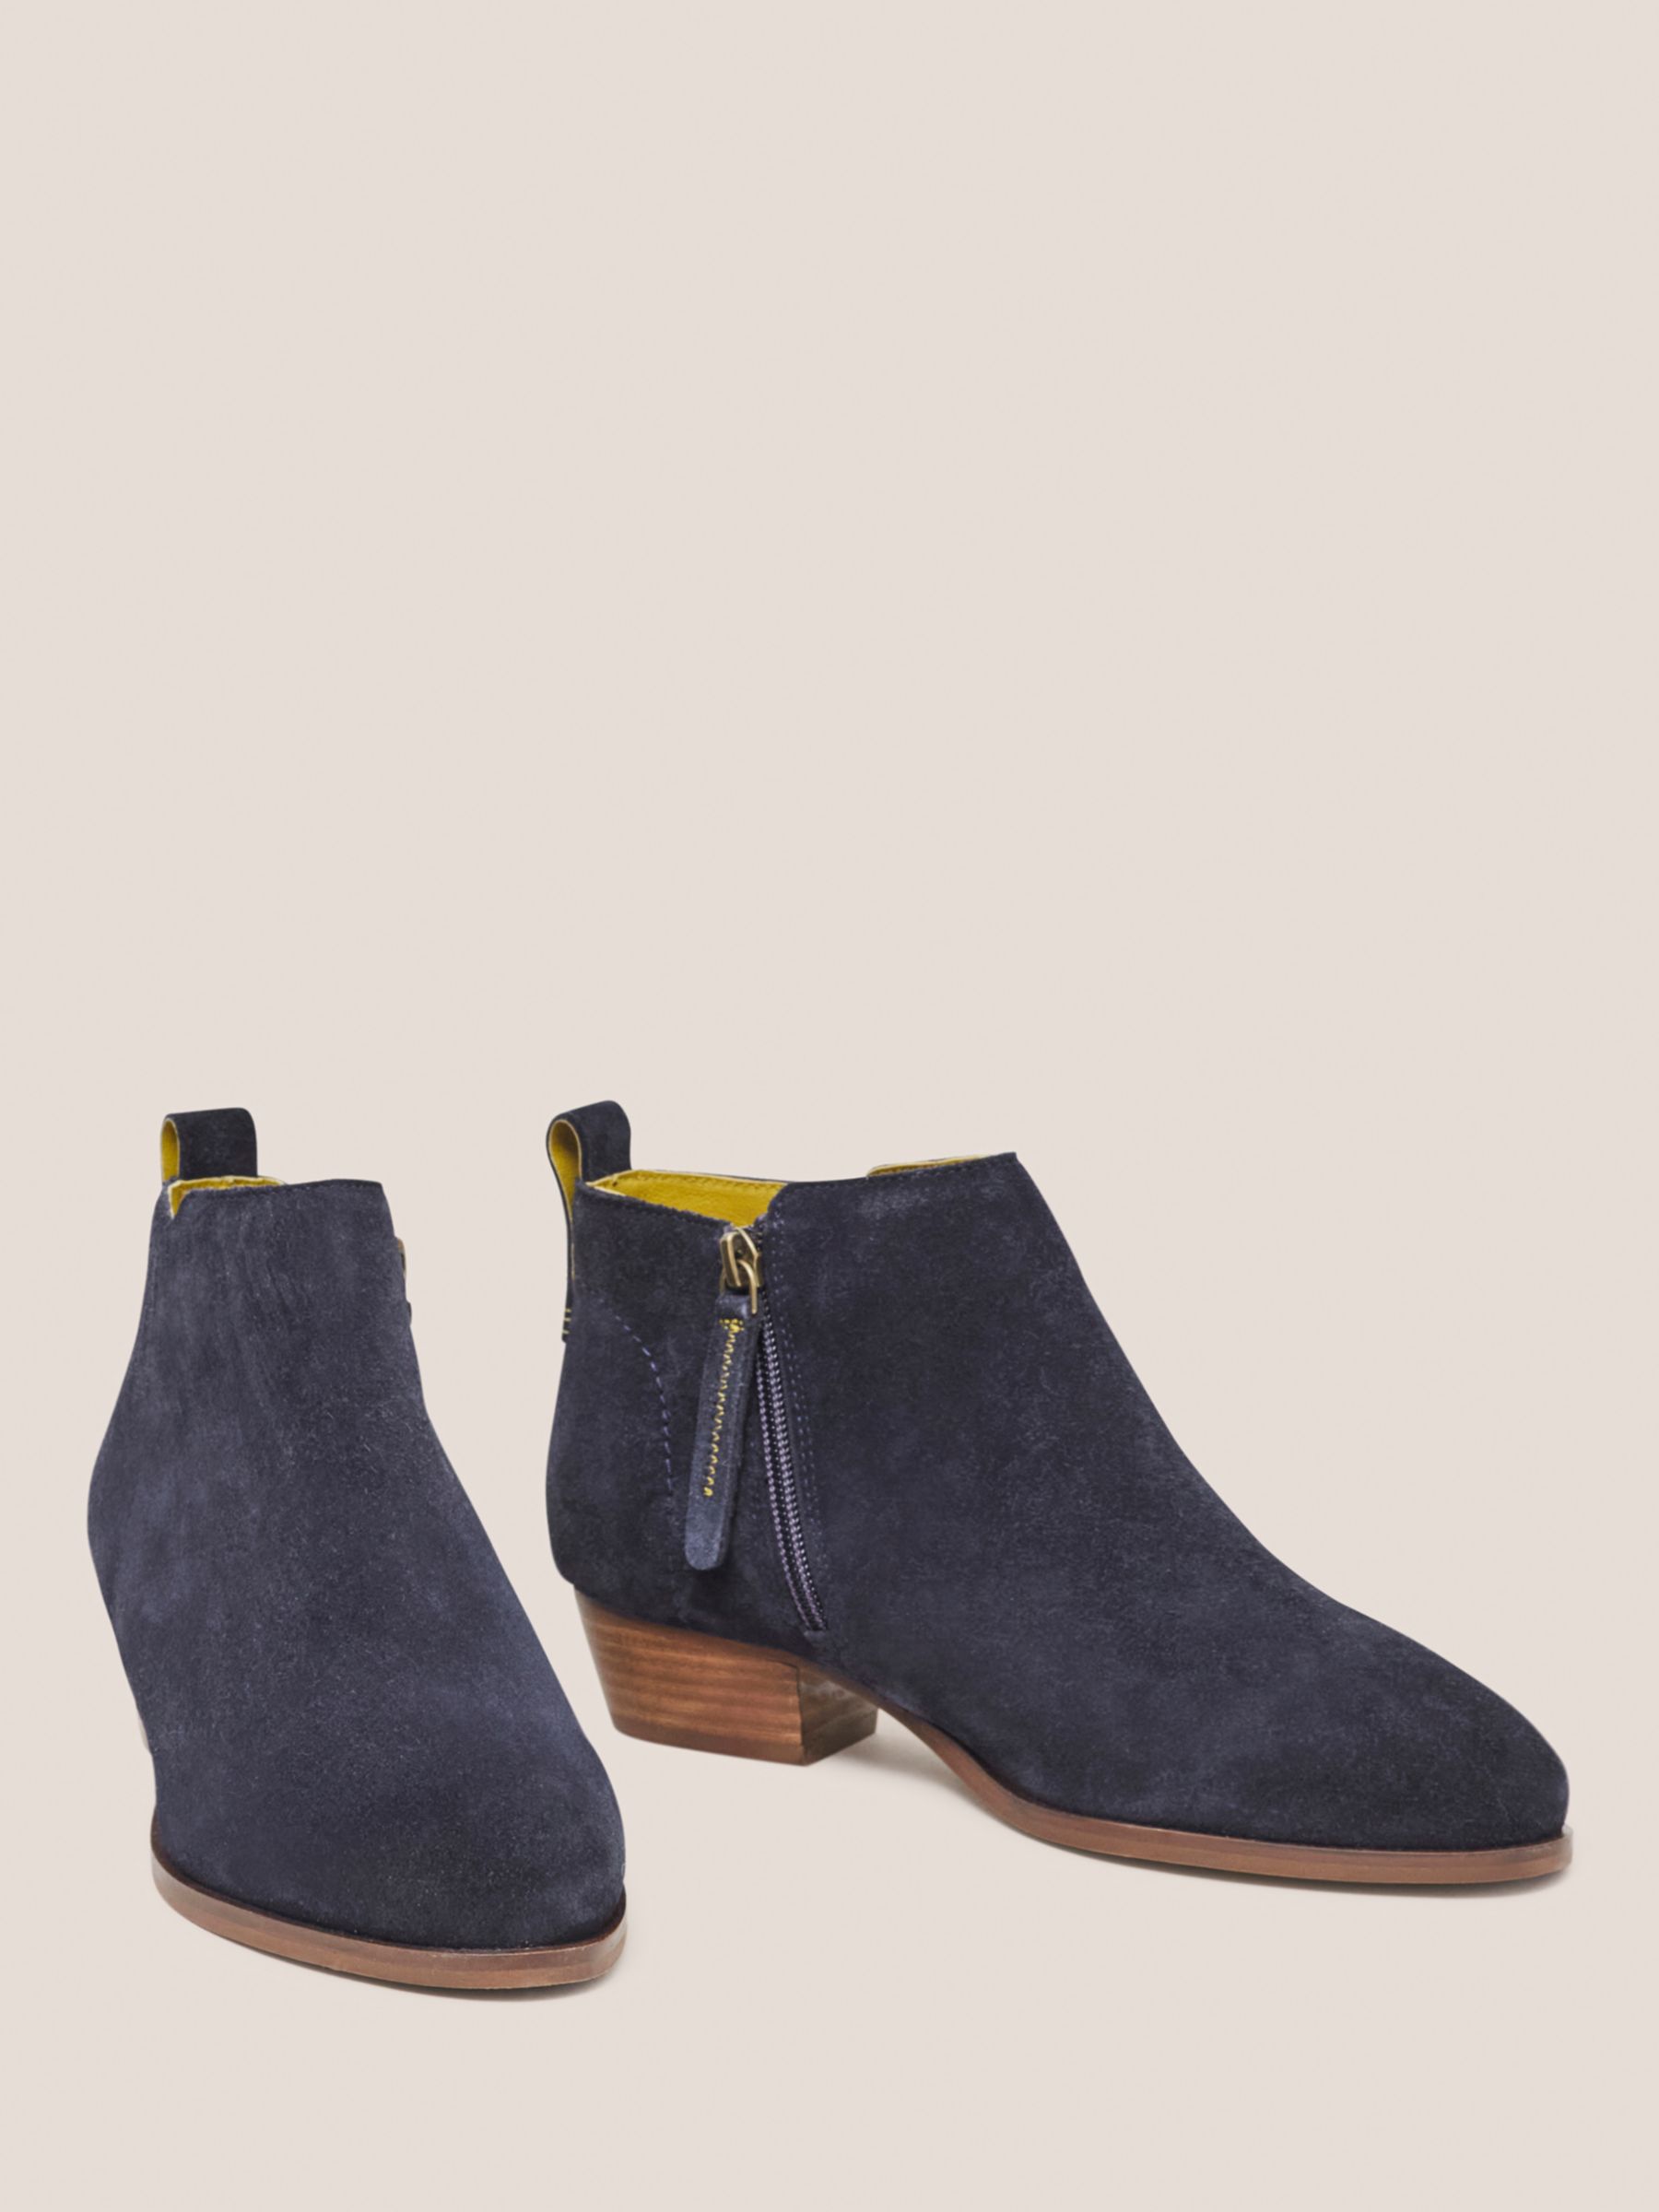 White Stuff Willow Suede Ankle Boots, Dark Navy at John Lewis & Partners